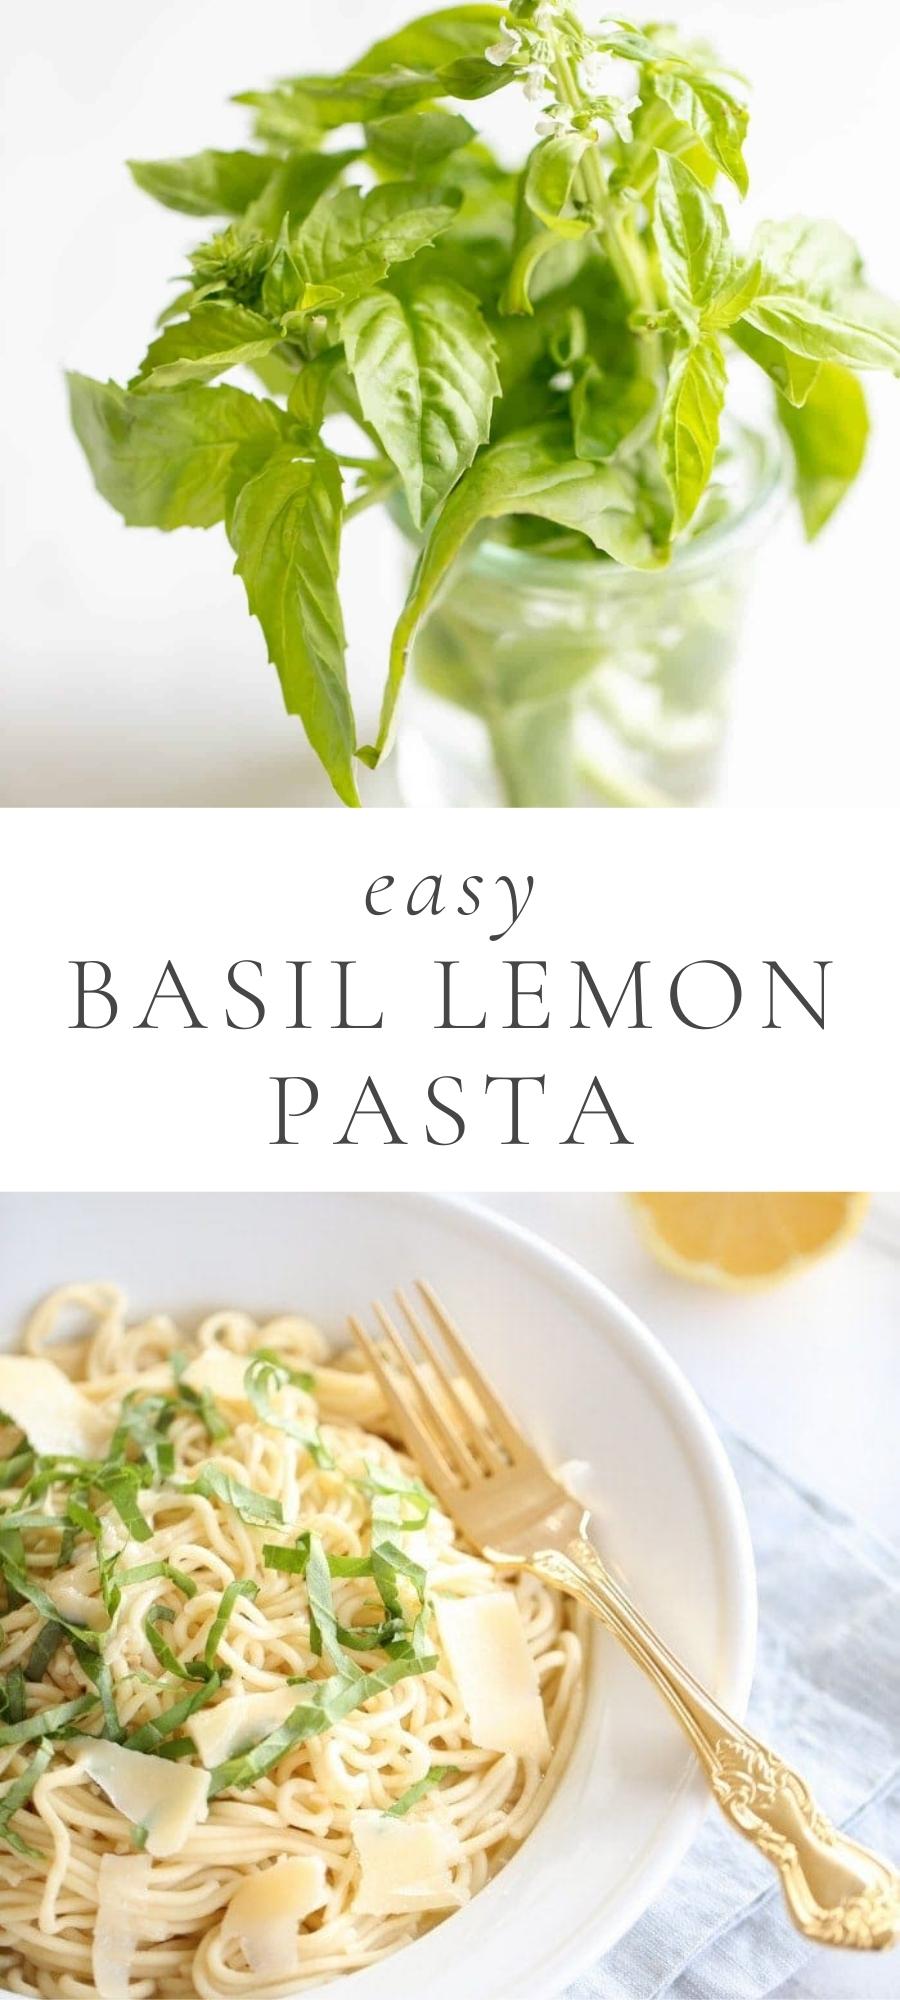 basil in glass and pasta with basil and lemon in. plate with wood spoon